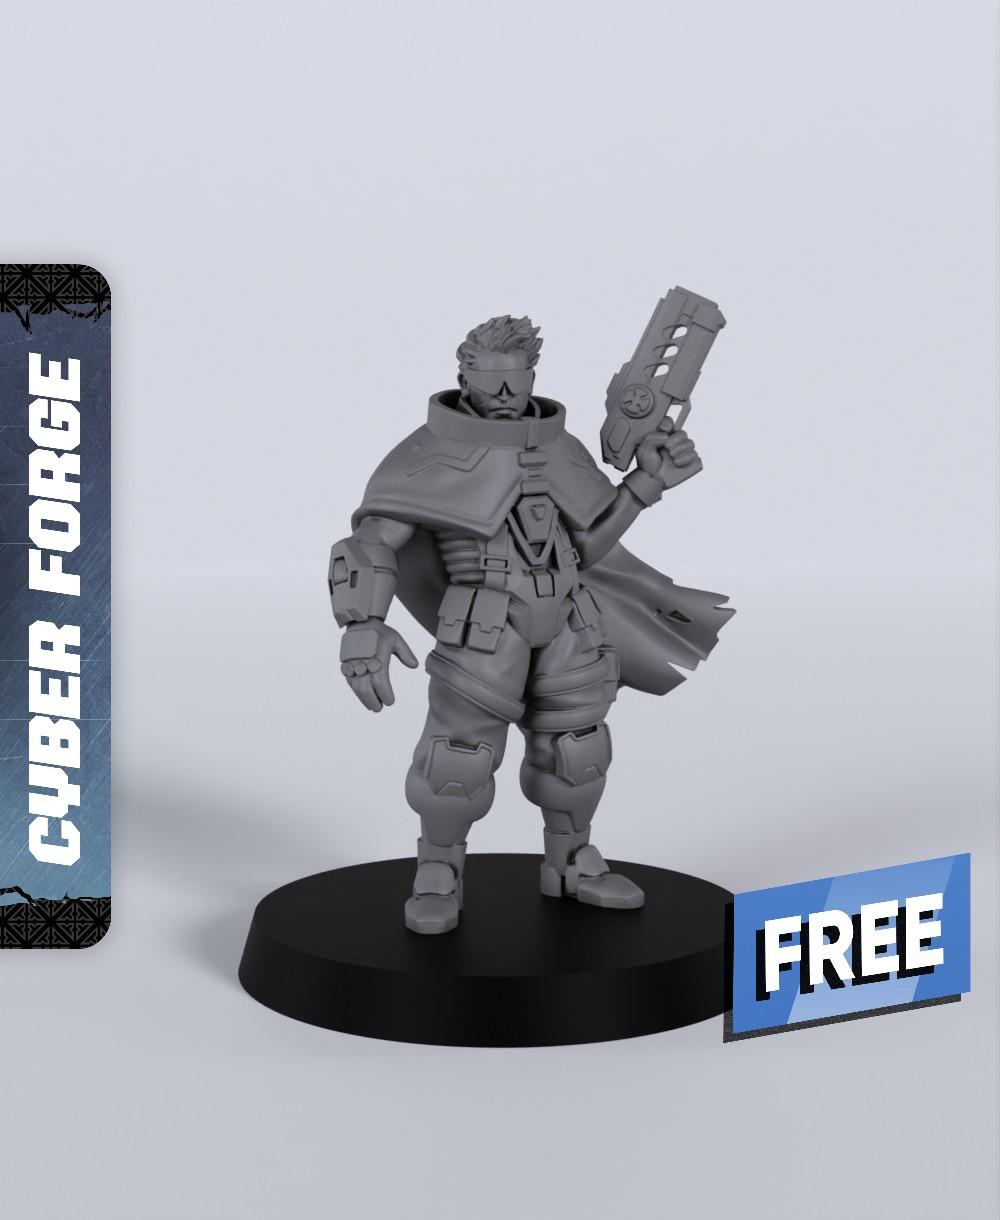 FPFH Hero - With Free Cyberpunk Dragon Warhammer - 40k Sci-Fi Gift Ideas for RPG and Wargamers 3d model